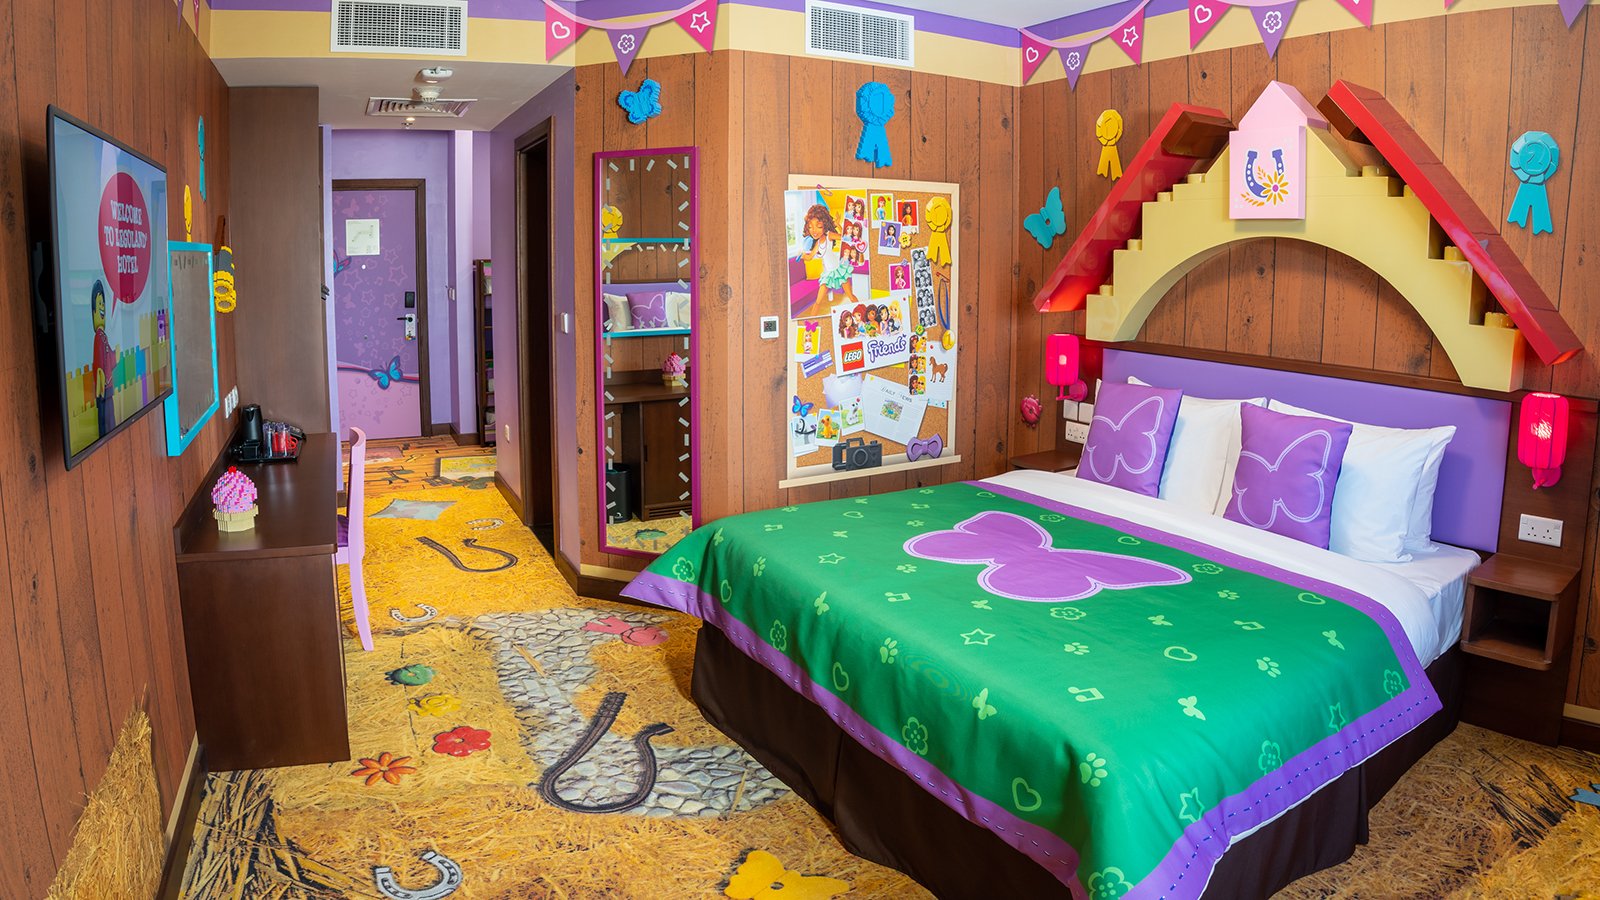 Lego Friends room 